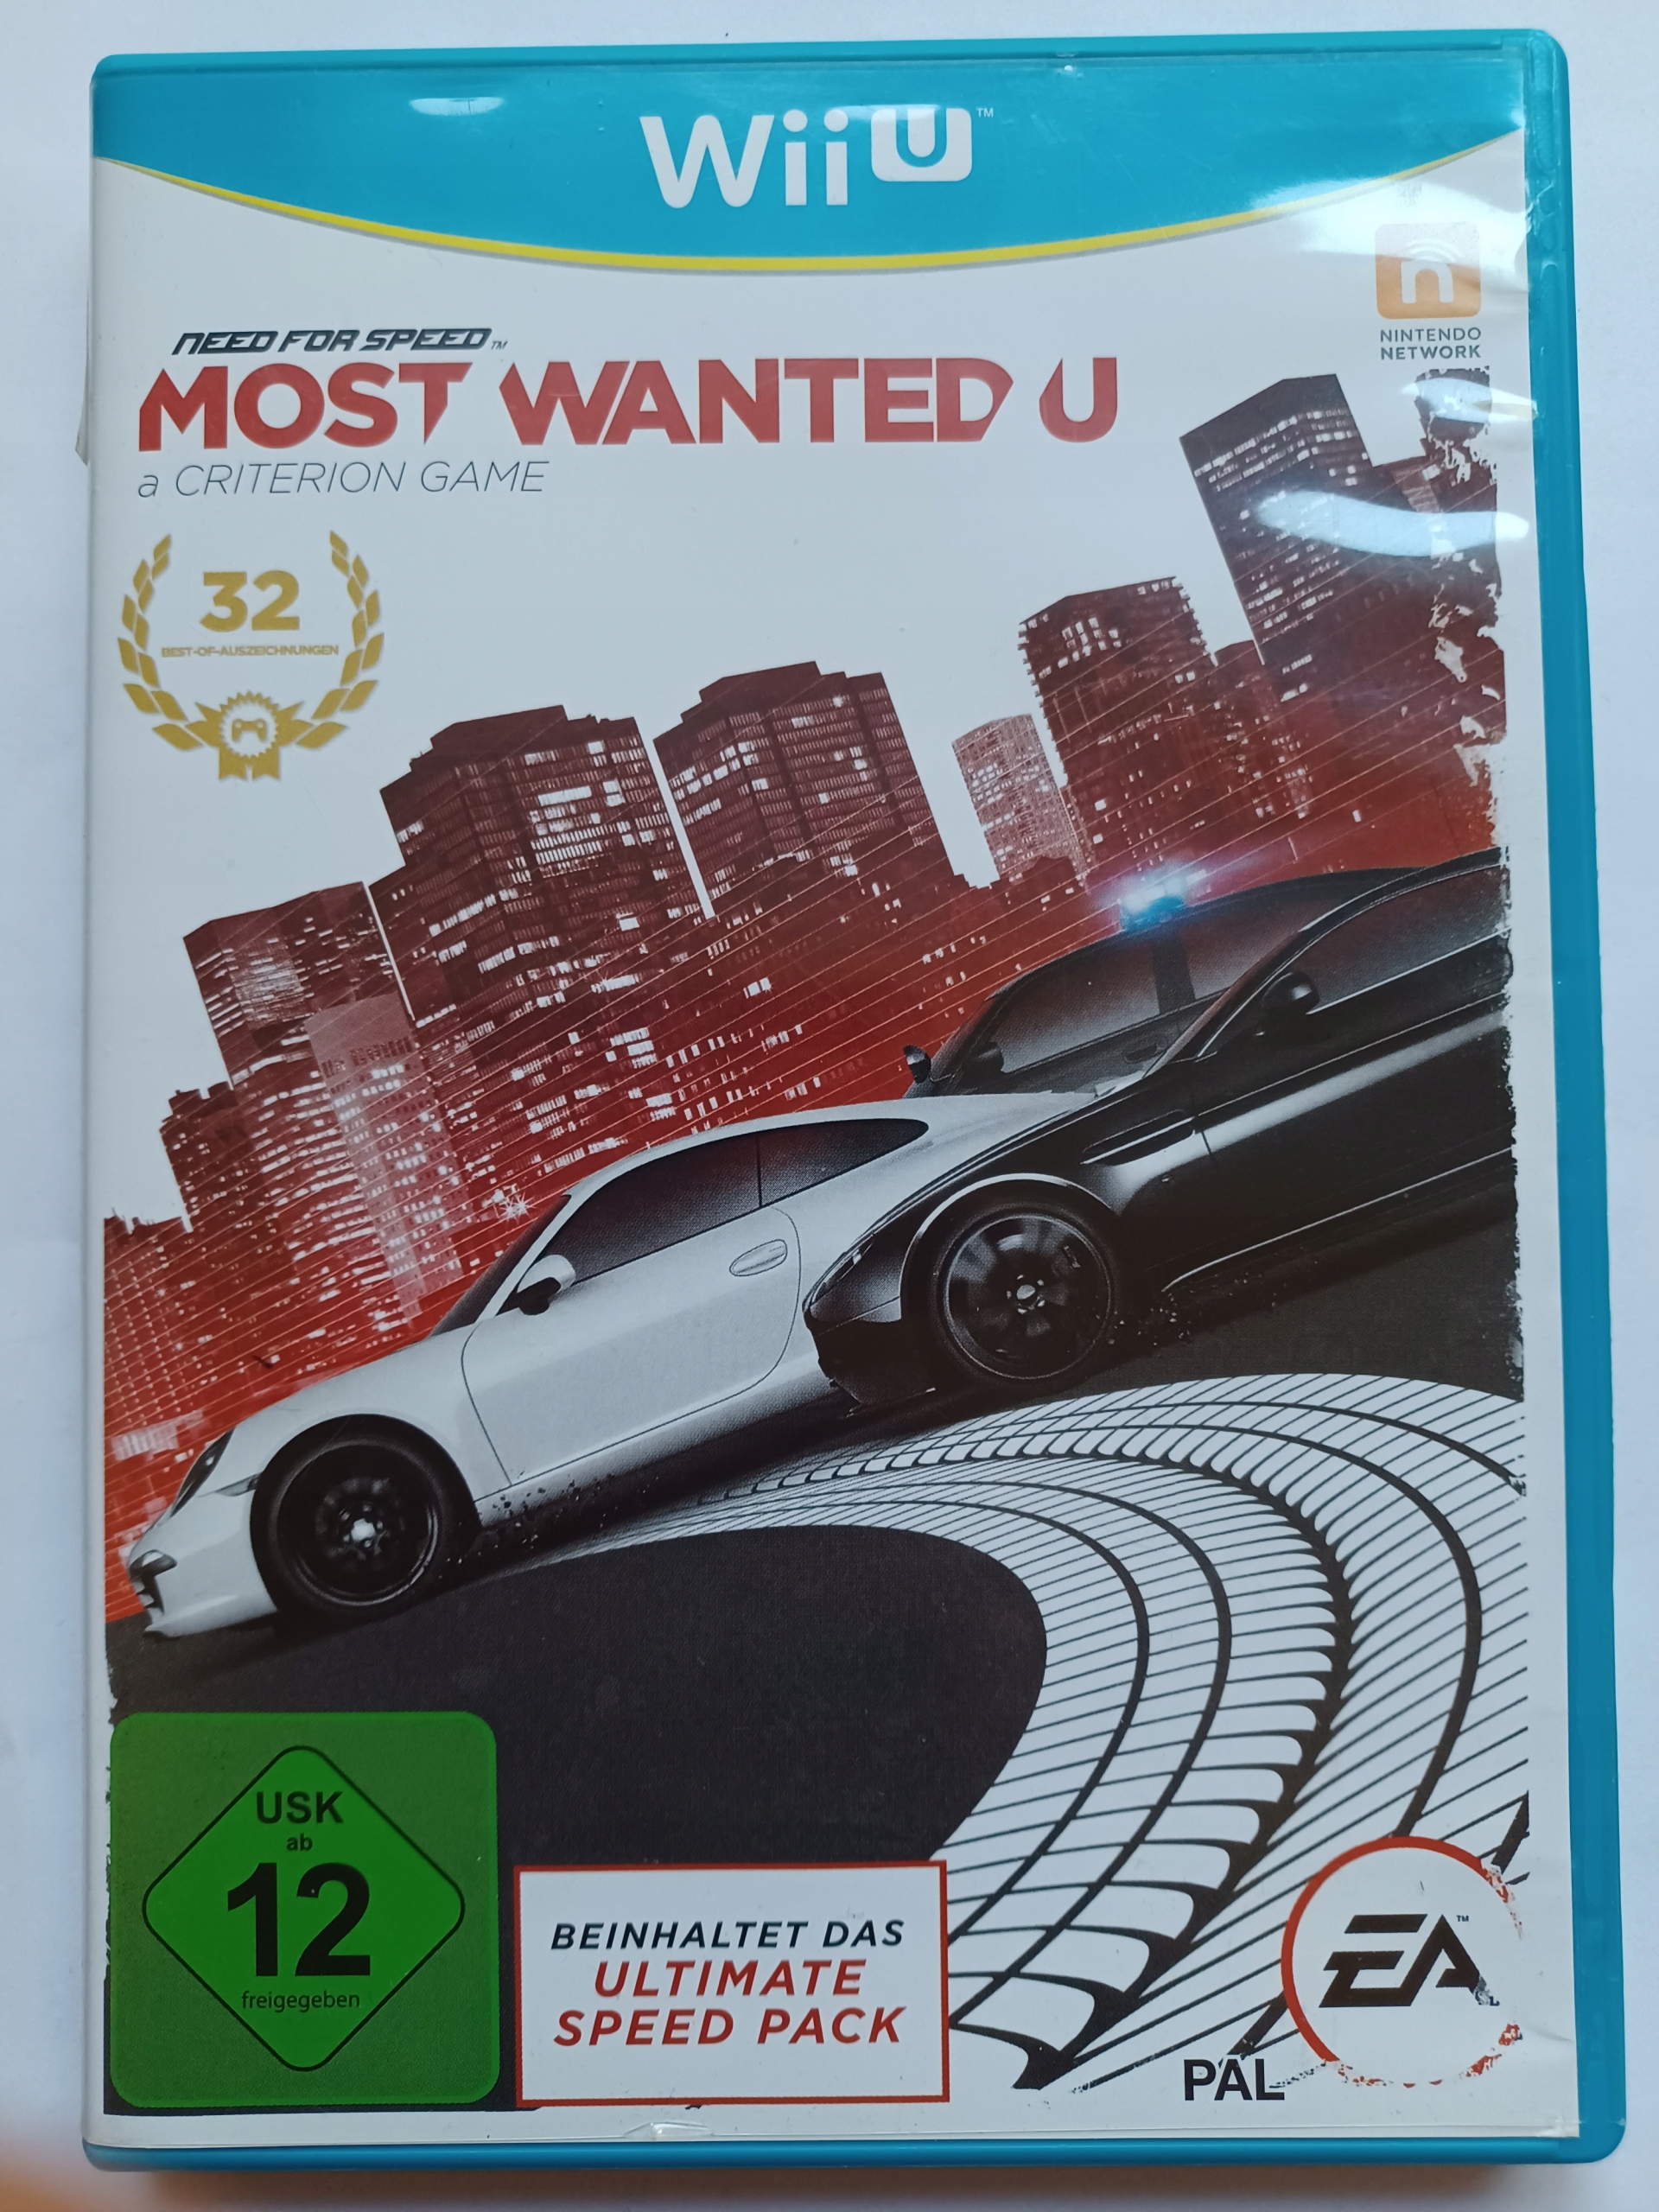 Need for Speed Most Wanted U, Wii U